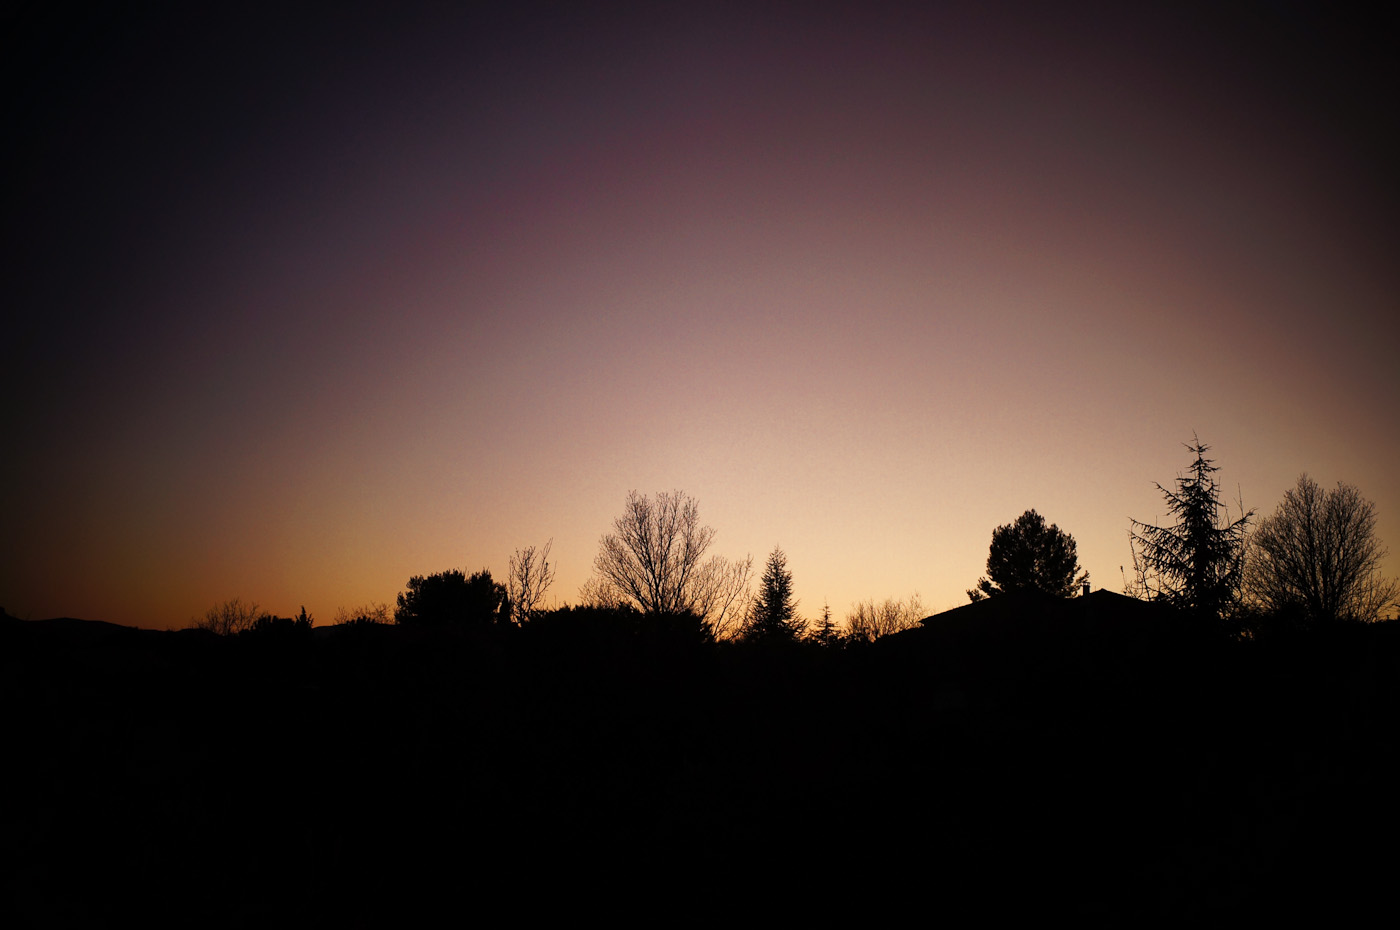 A magenta sunset accentuated by the Toy Cameramode on the Sony NEX-5N. Imaged with the Elmarit-M 90/2.8 Leica lens